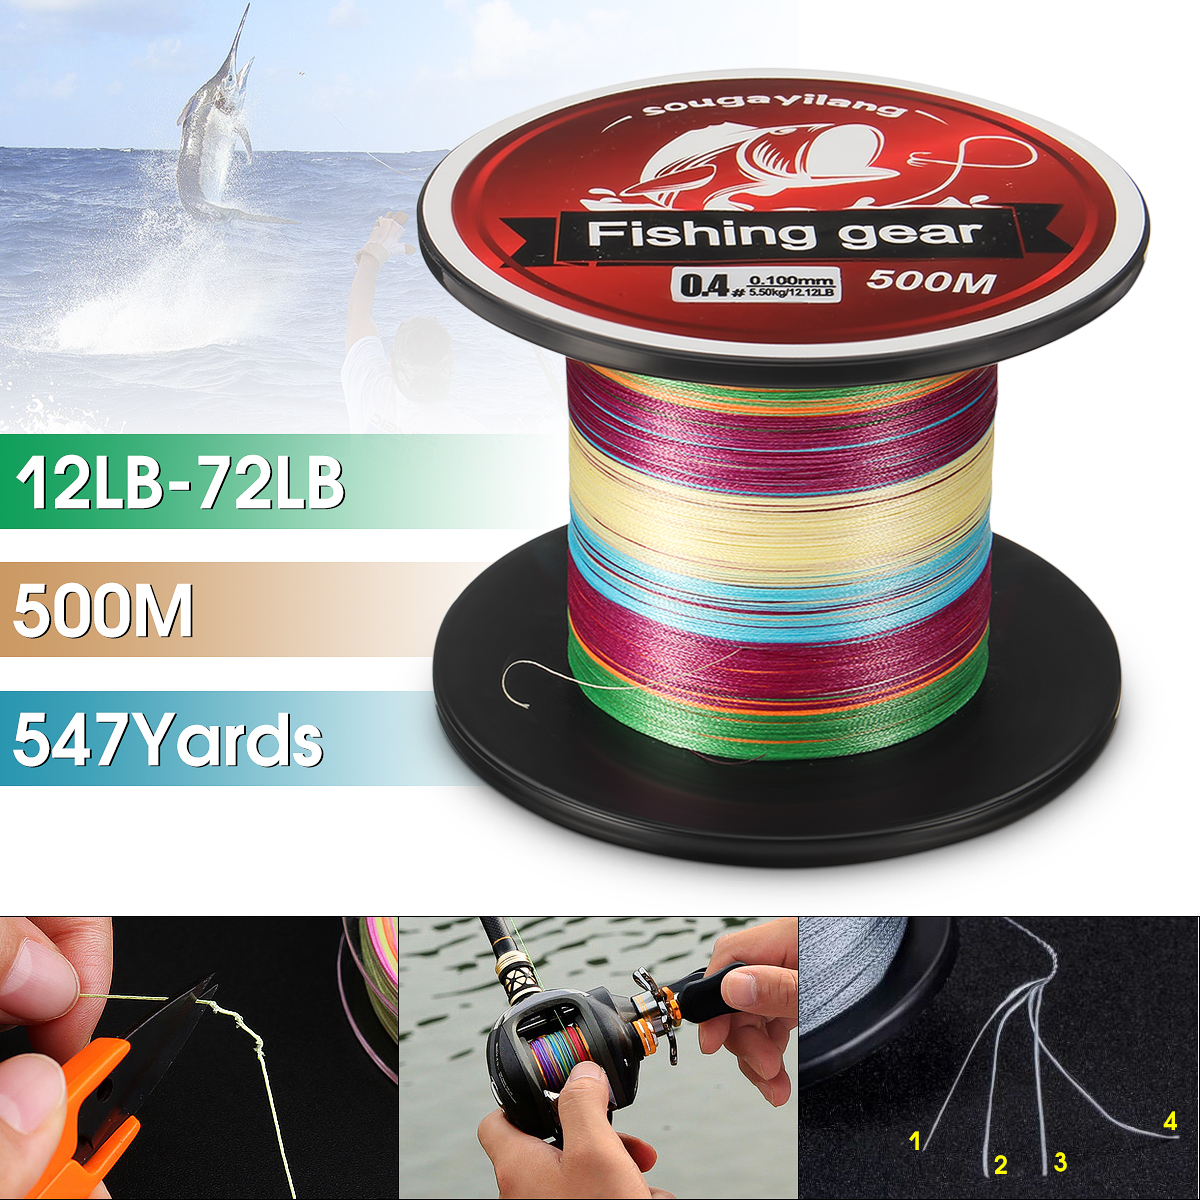 Zanlure-Multicolor-547-Yards-500M-12-72LB-4-Strands-PE-Braided-Fishing-Line-Wire-Outdoor-Sea-Fishing-1638563-1